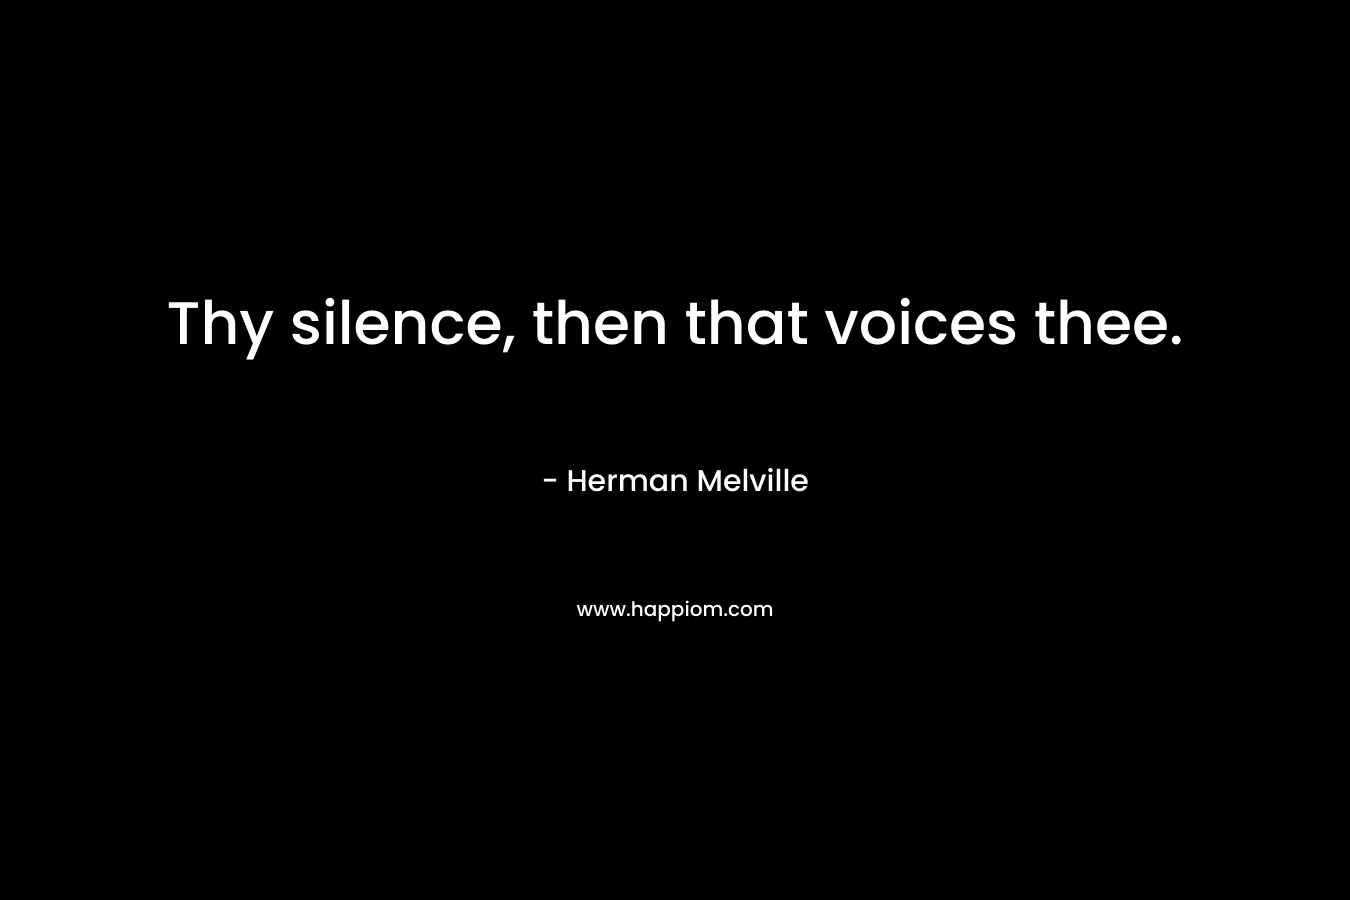 Thy silence, then that voices thee.